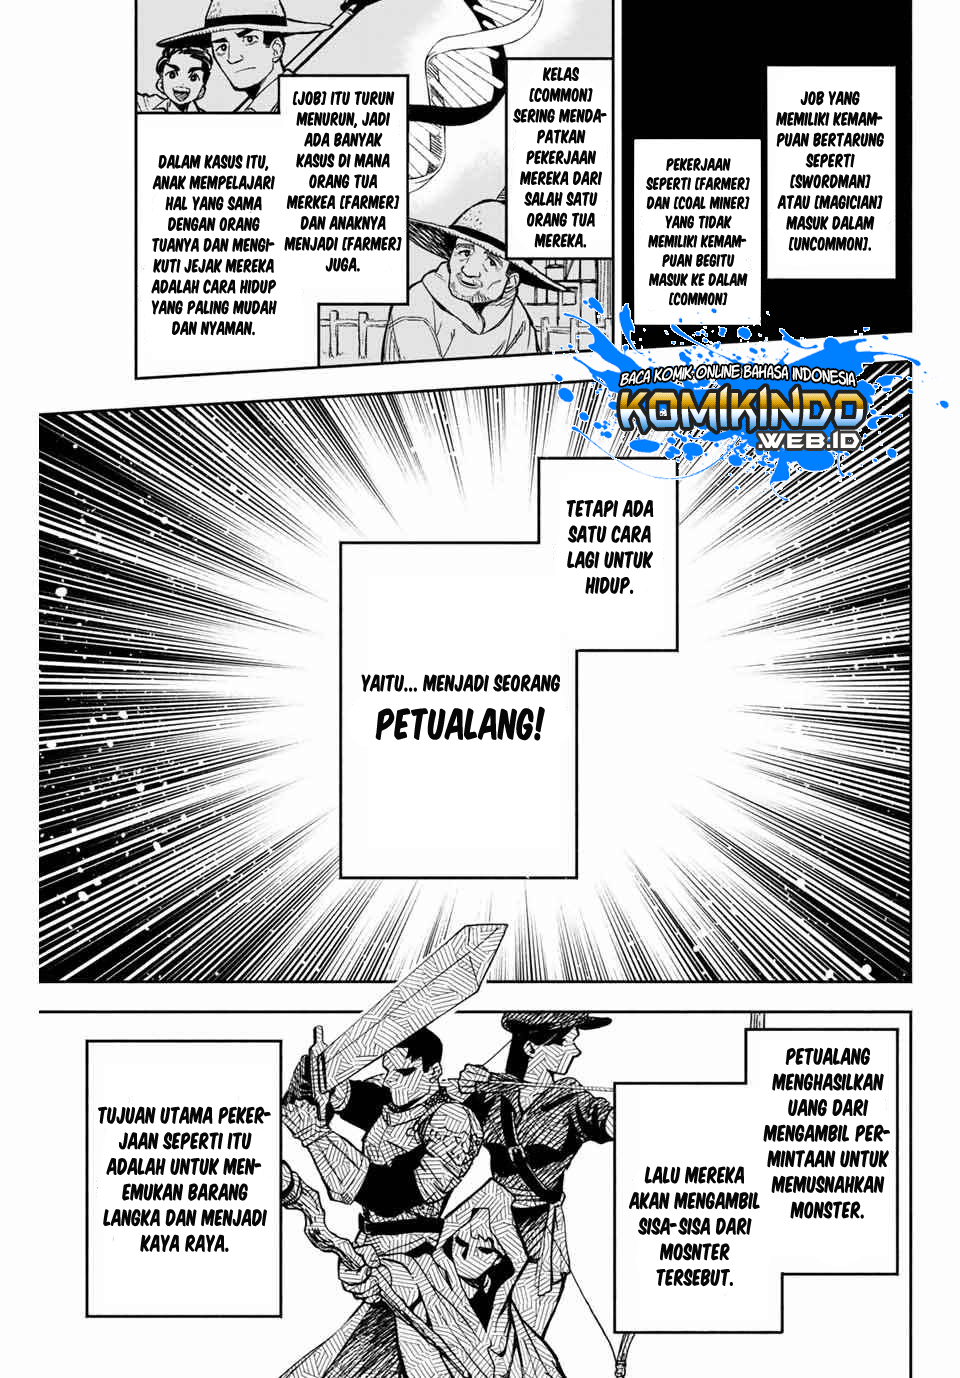 Spoiler Manga The Unfavorable Job “Appraiser” Is Actually the Strongest 3